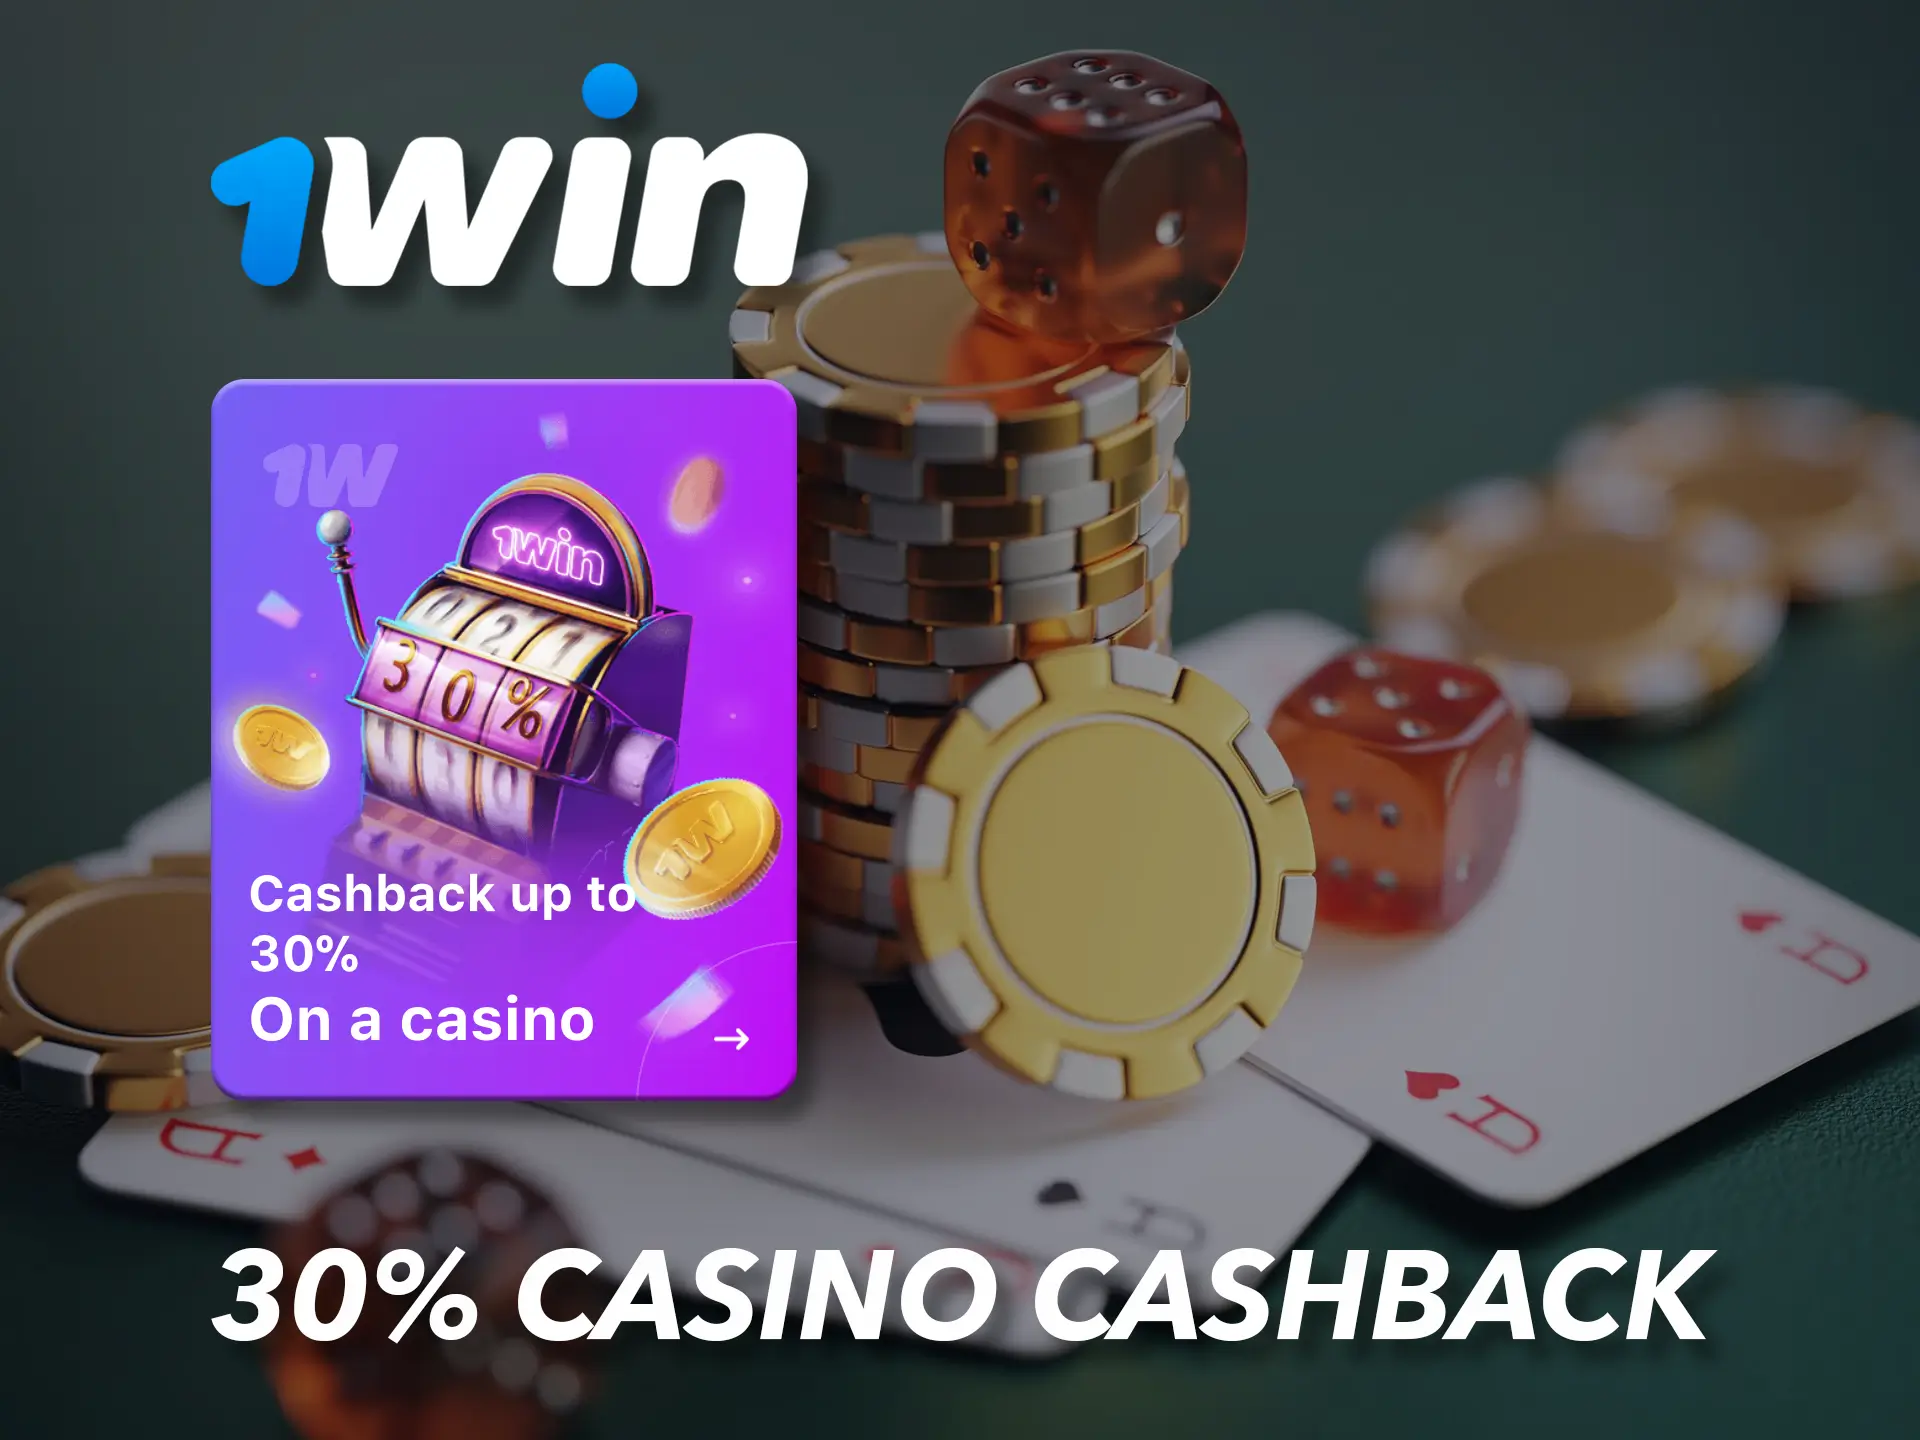 Don't be afraid to lose, as you can always get your cashback from 1Win.